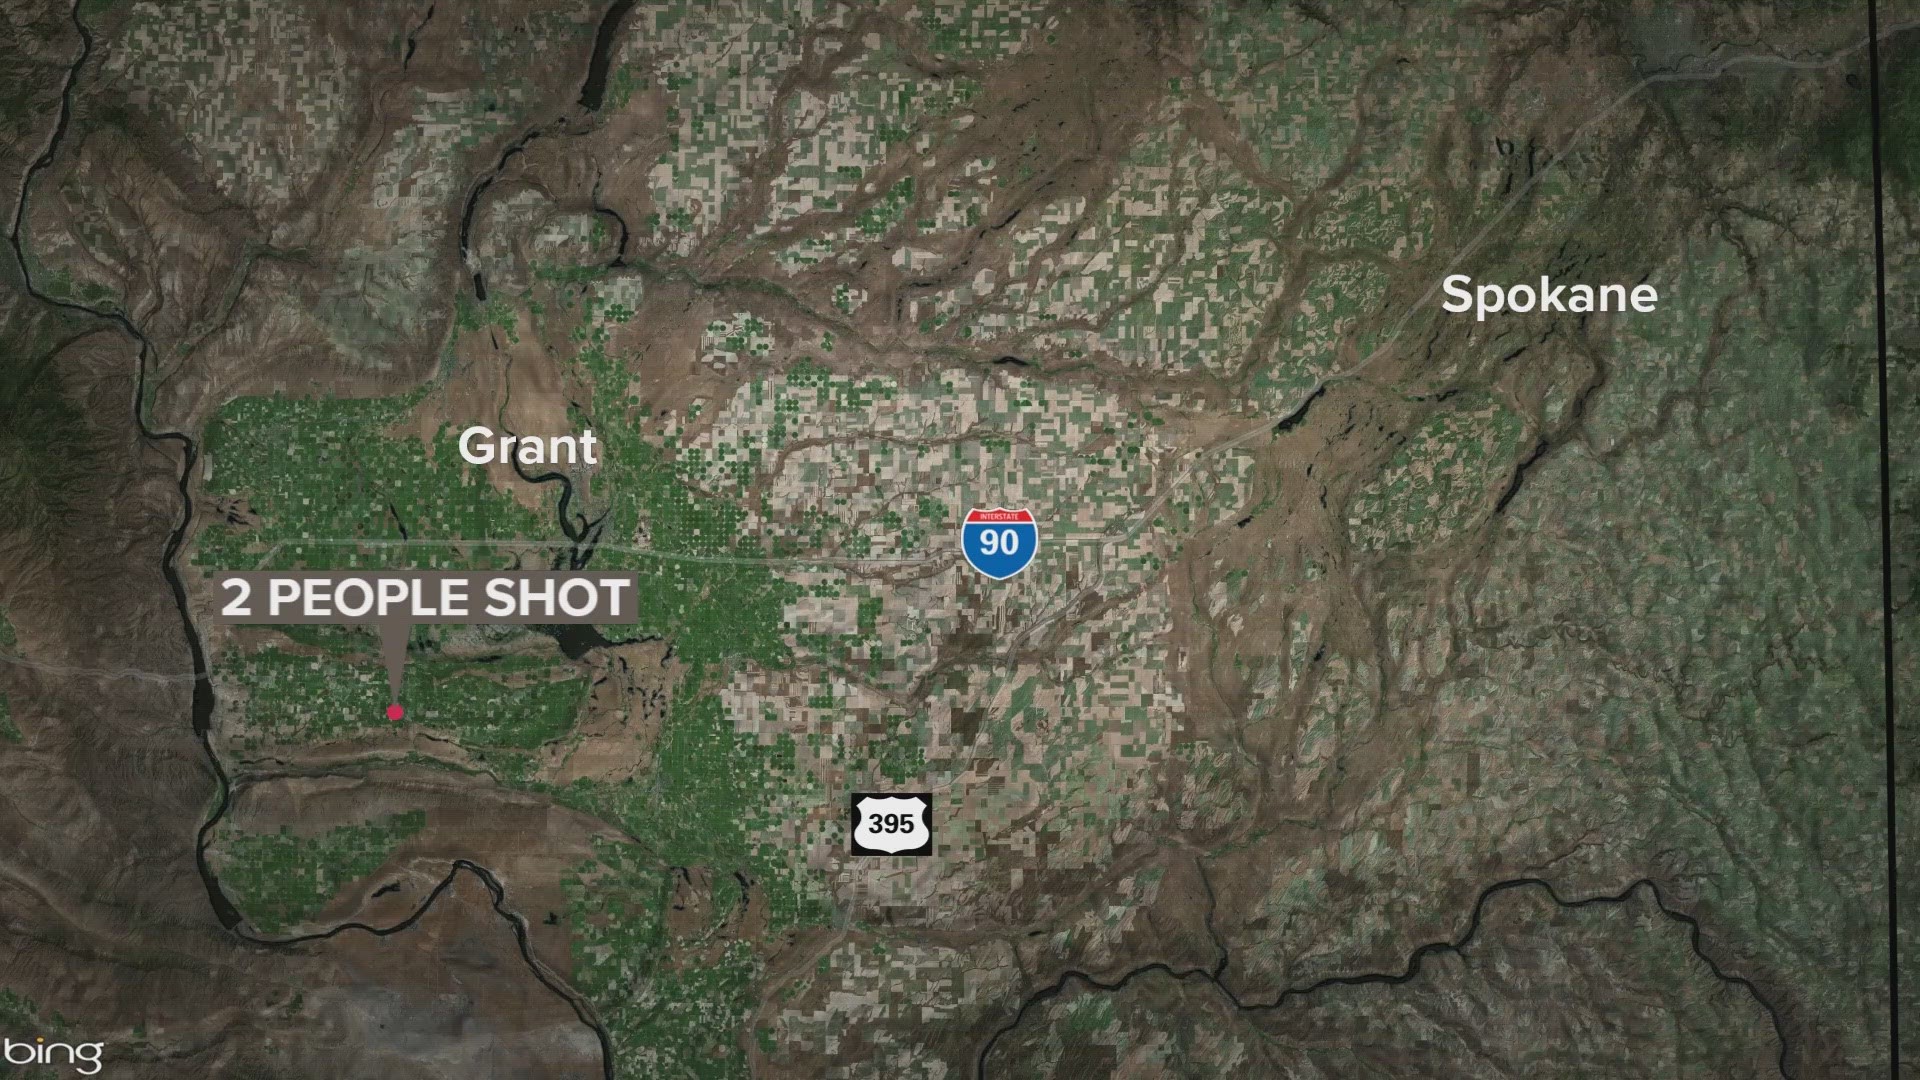 The Grant County Sheriff's Office says no suspects are outstanding. More information is expected soon.